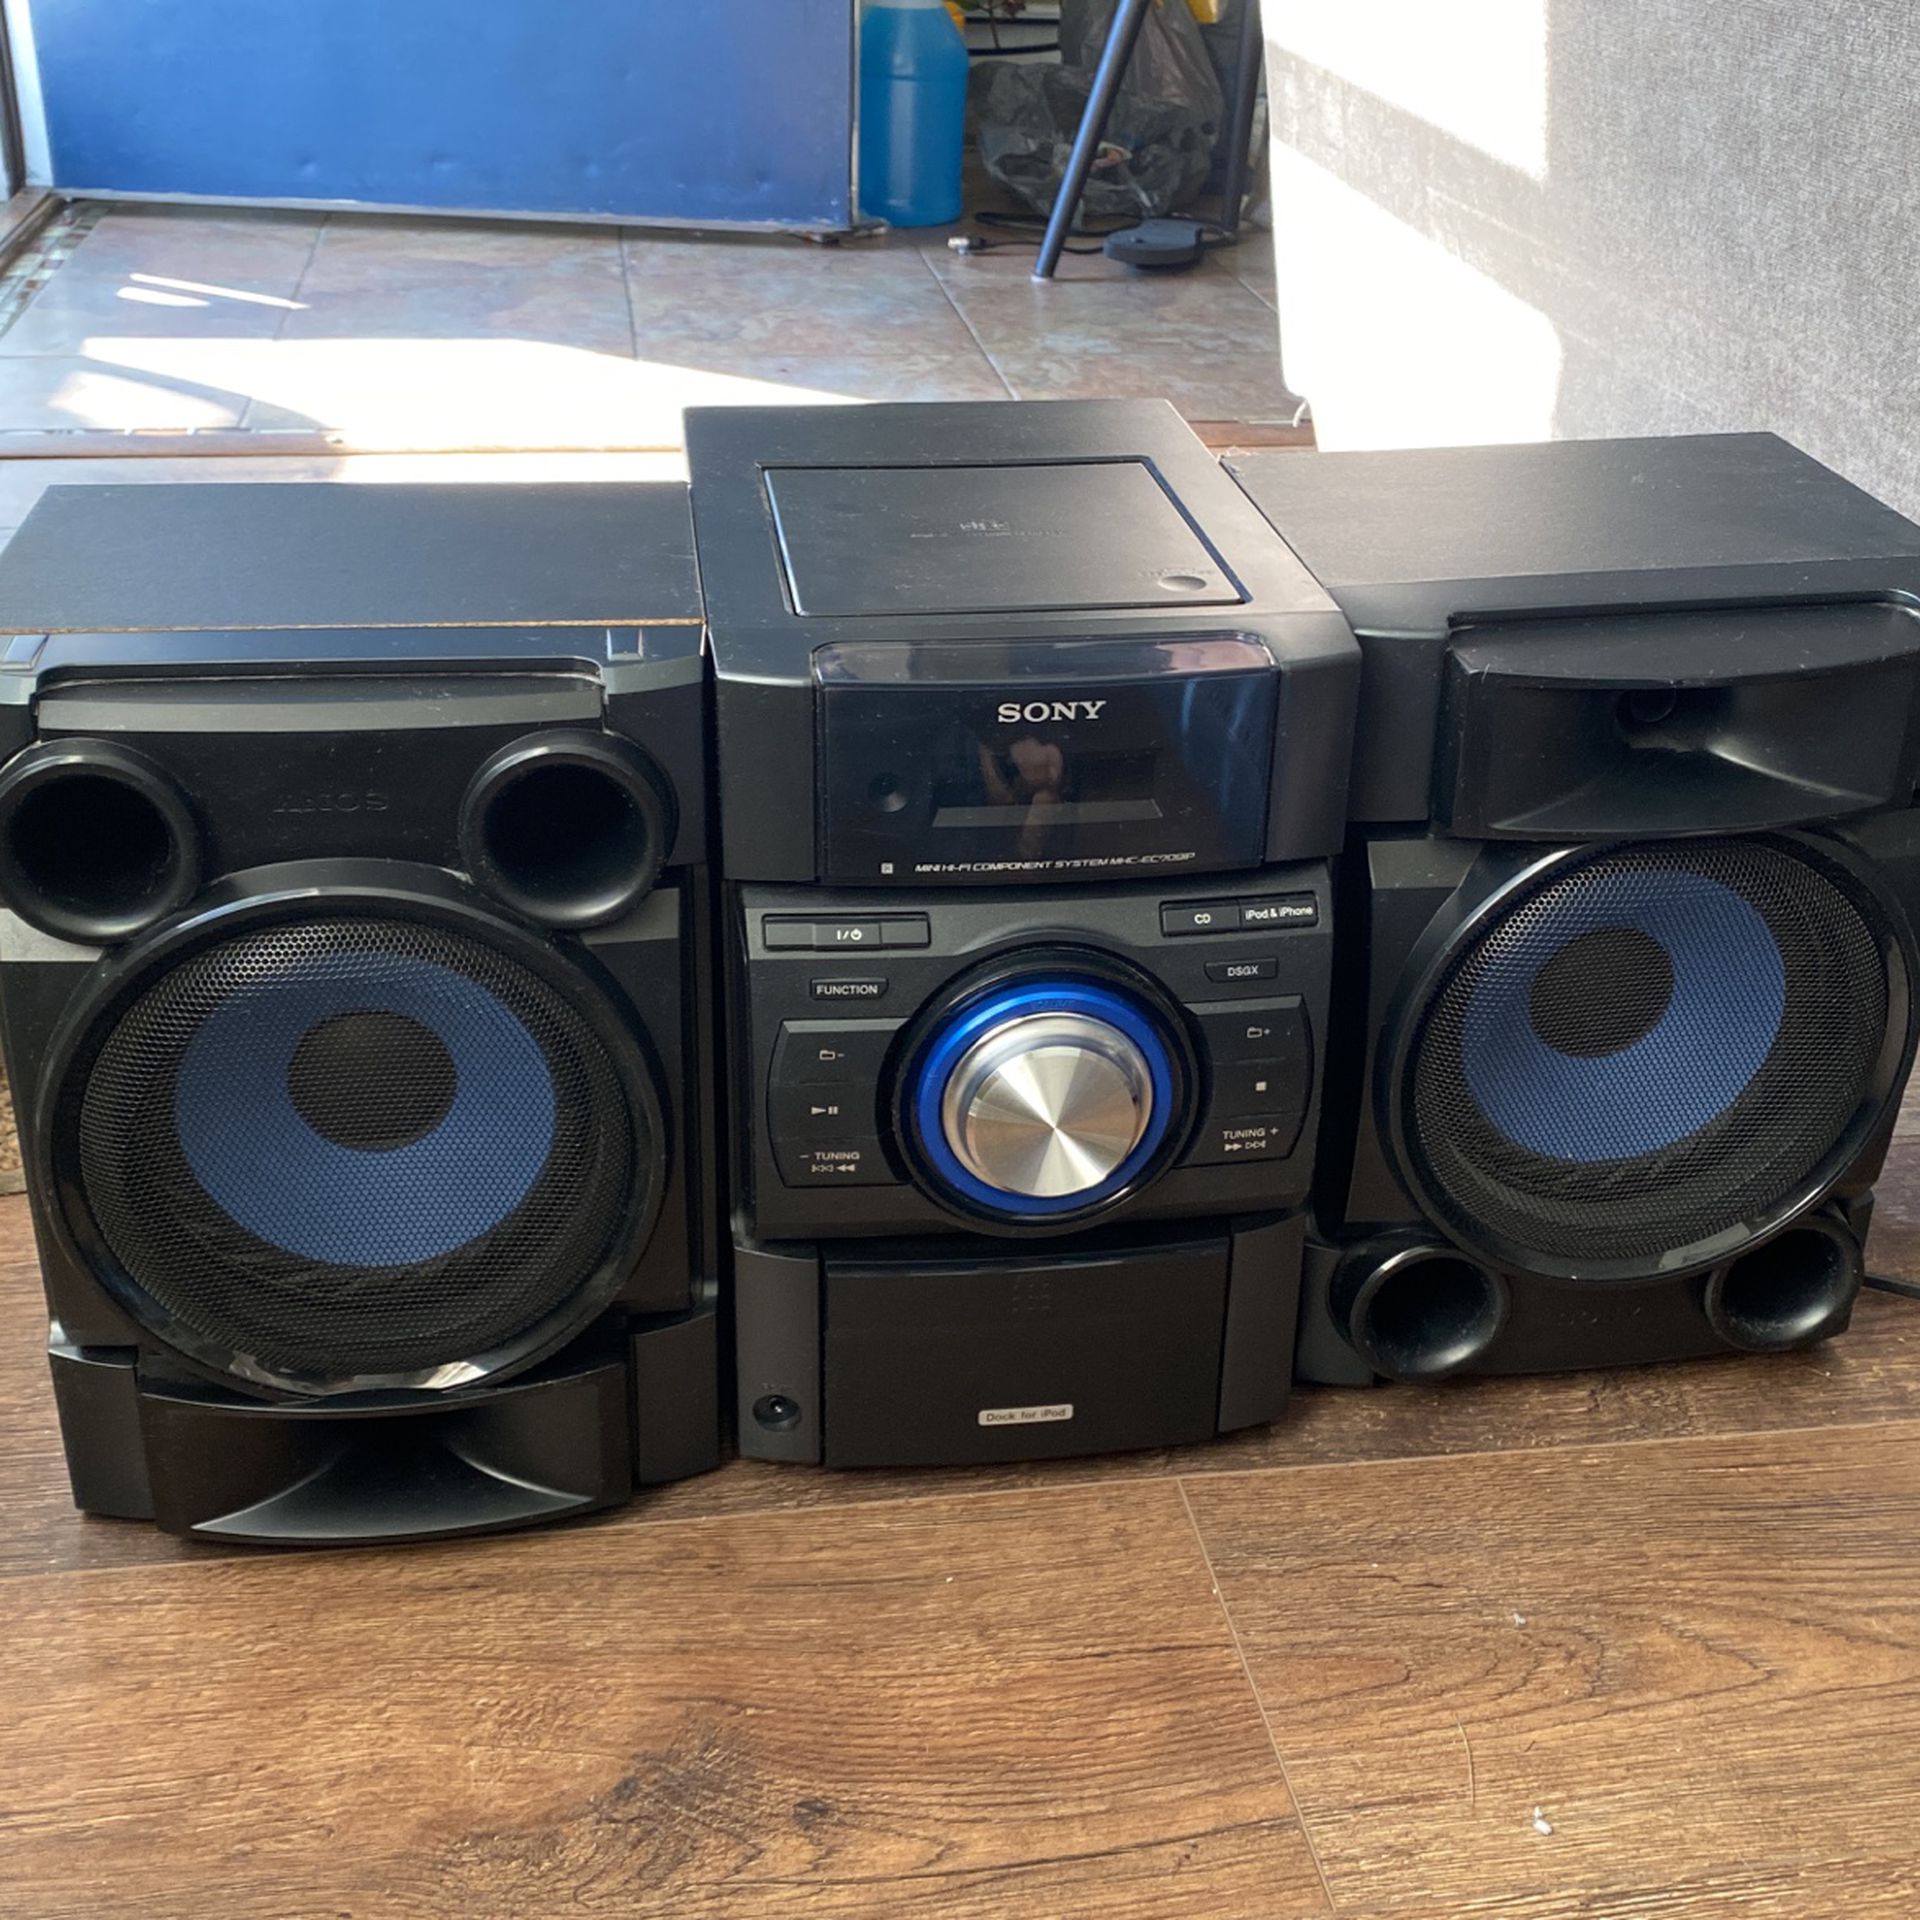 Like New Sony Stereo System 